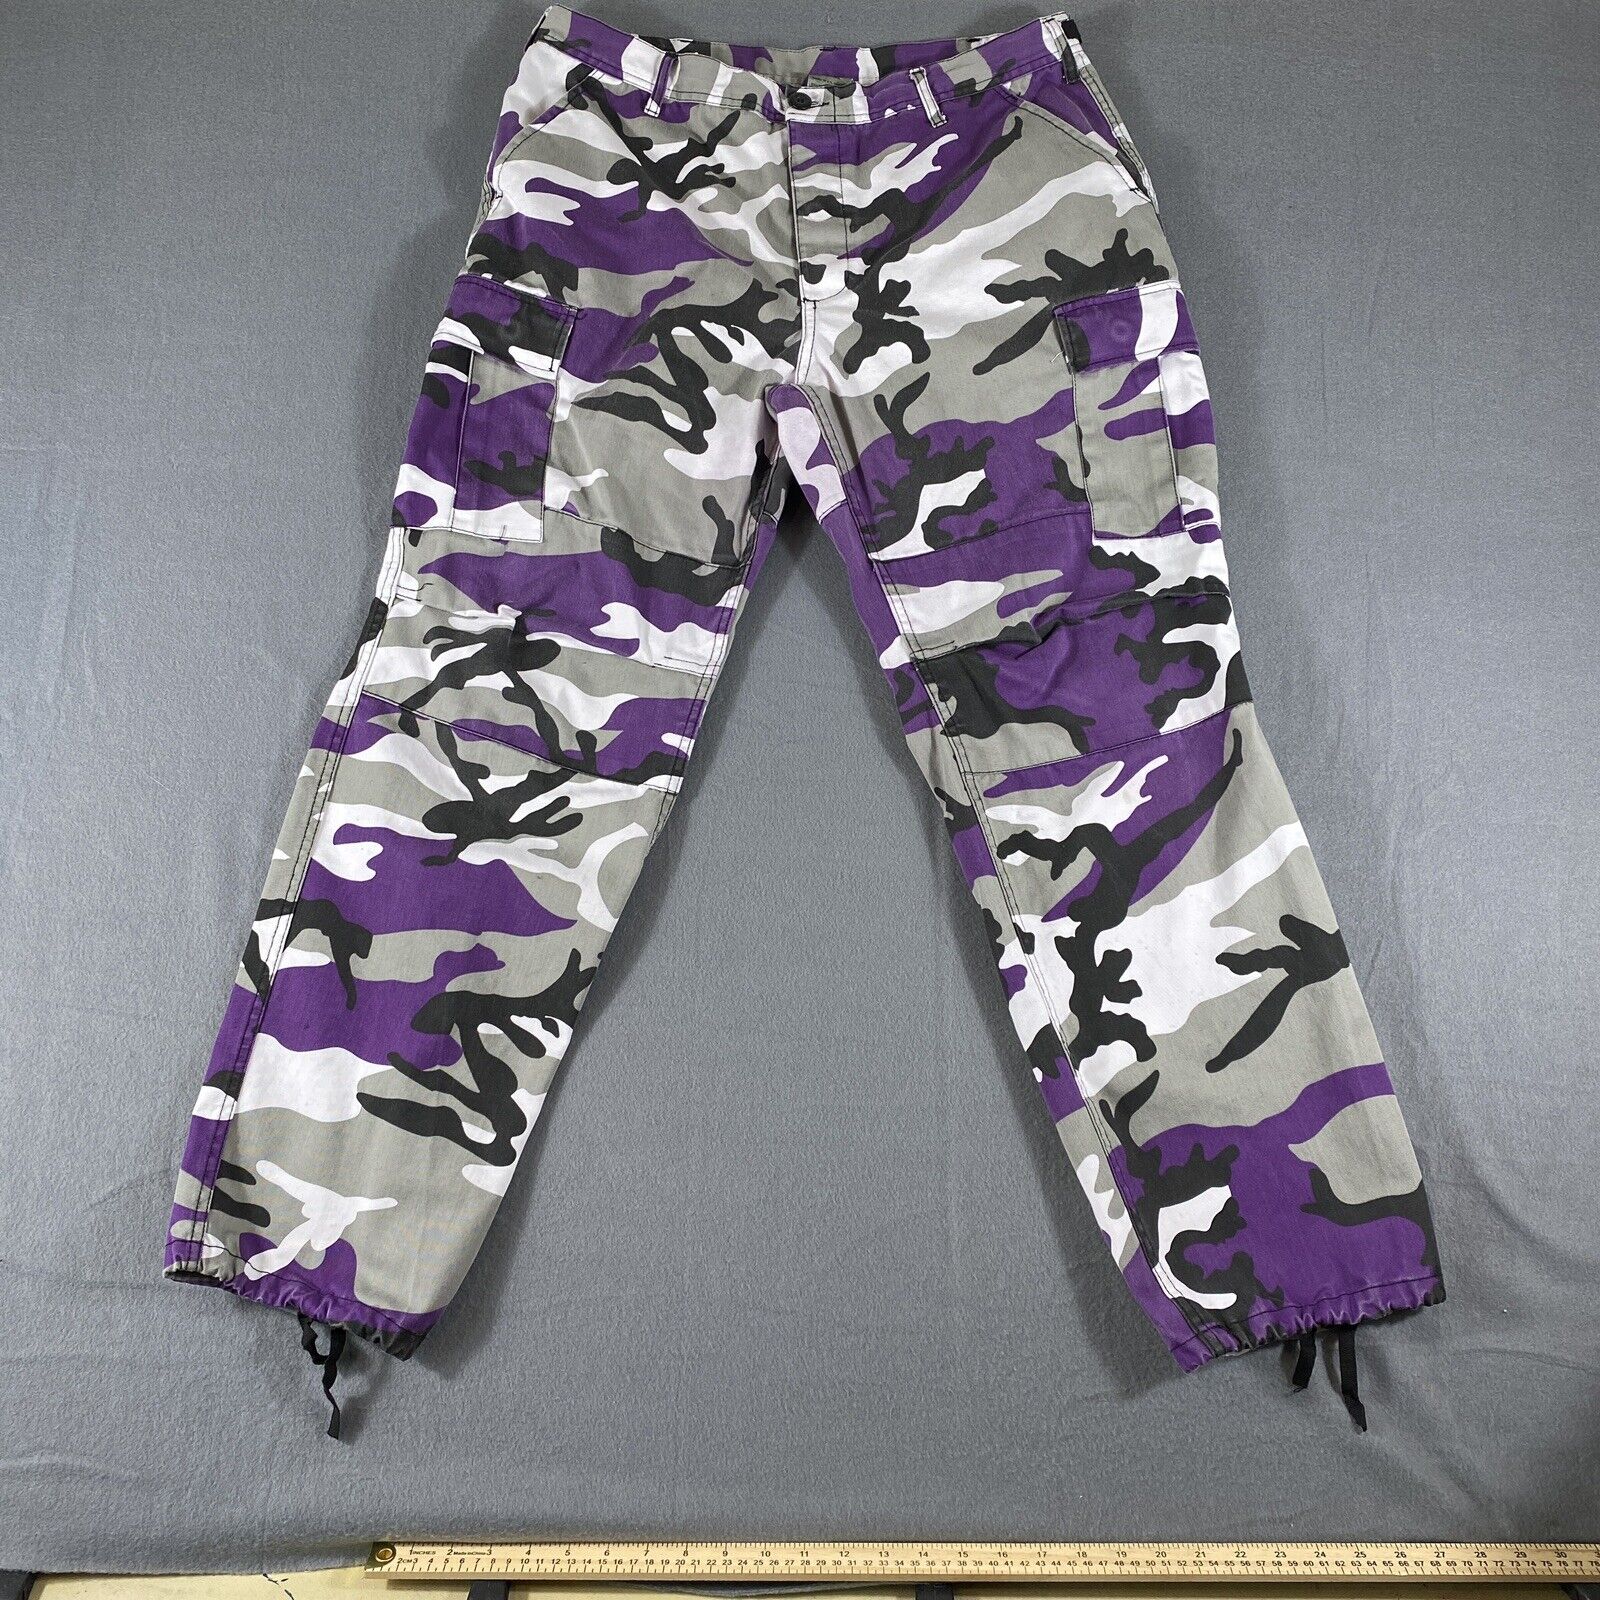 Rothco BDU Pants Mens Tactial Purple Camouflage Military 35-39W 29 1/2-32 1/2 in